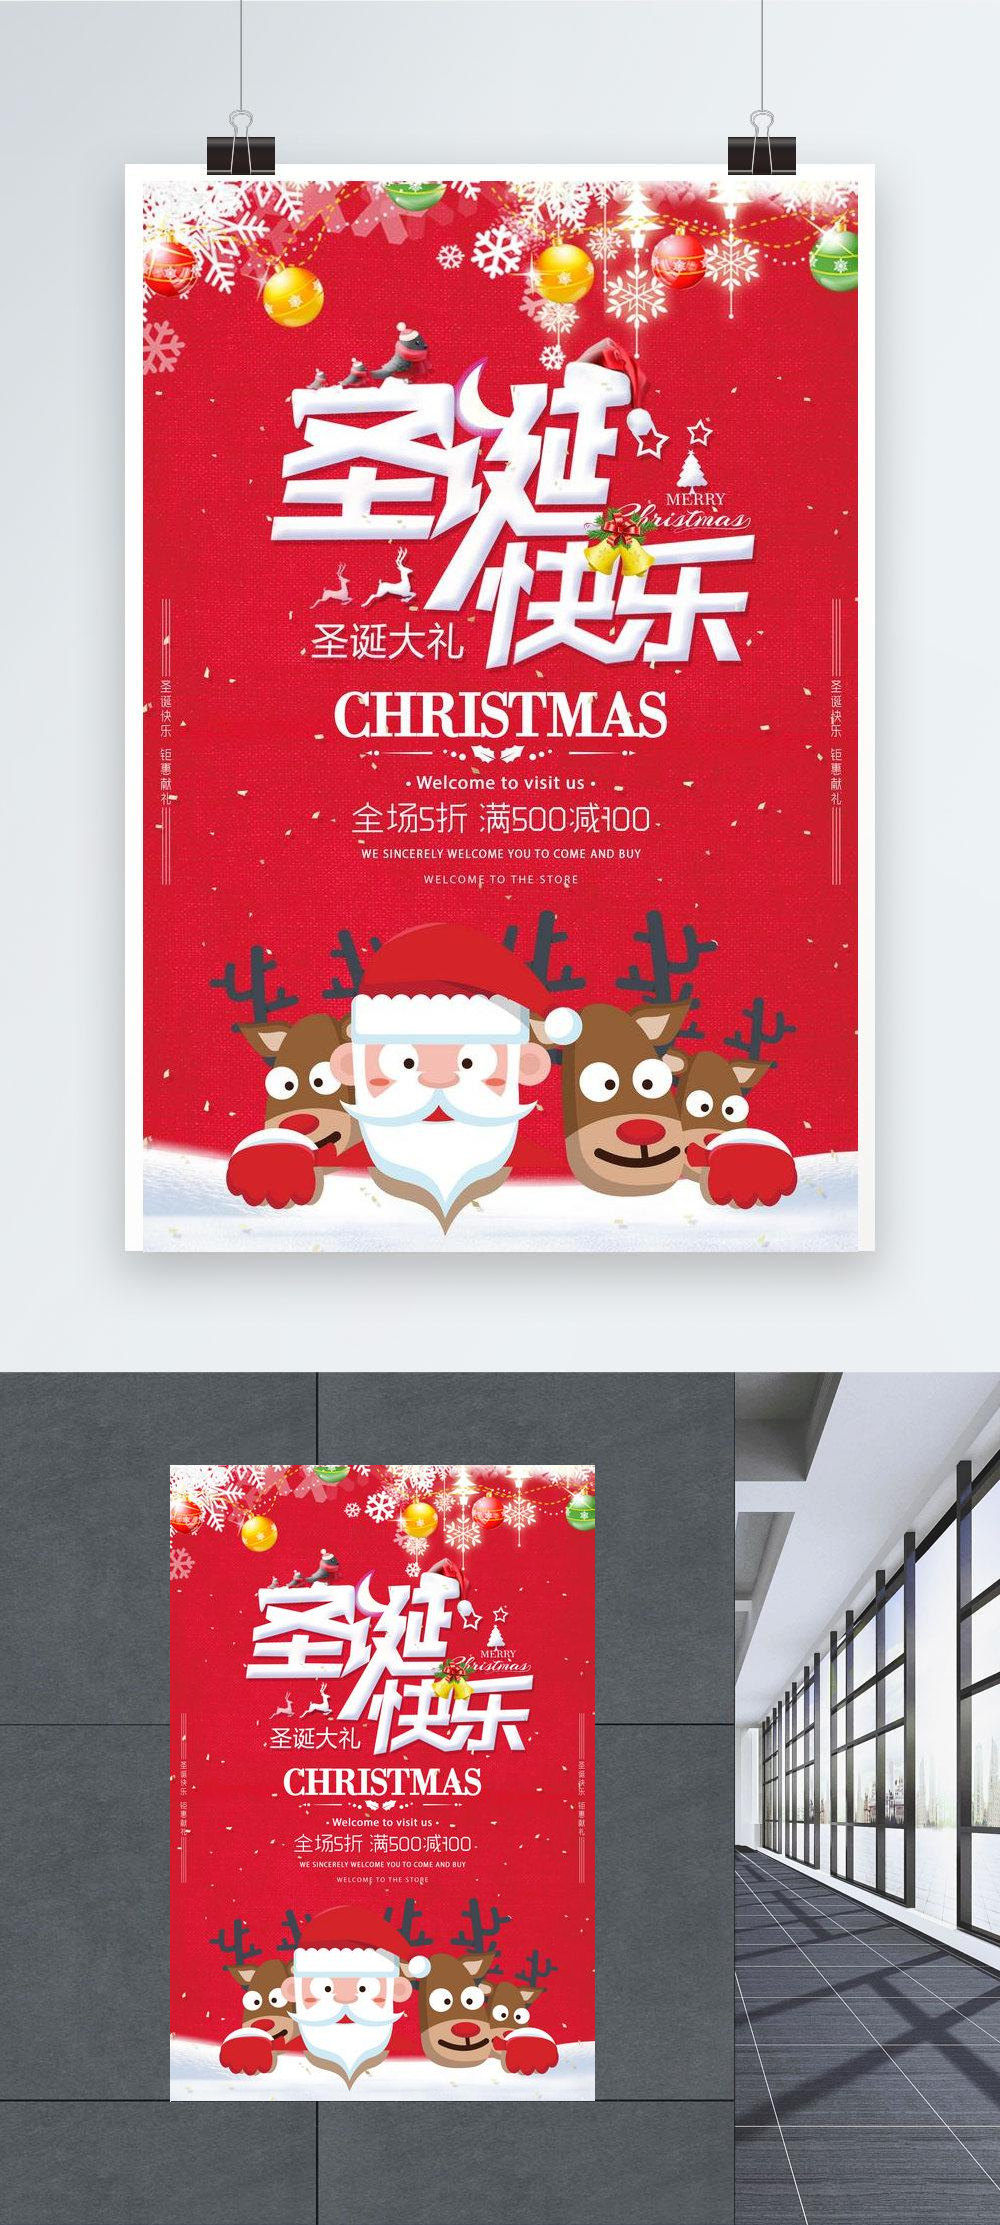 Download Creative Fashion Christmas Poster Template Image Picture Free Download 664828540 Lovepik Com SVG Cut Files